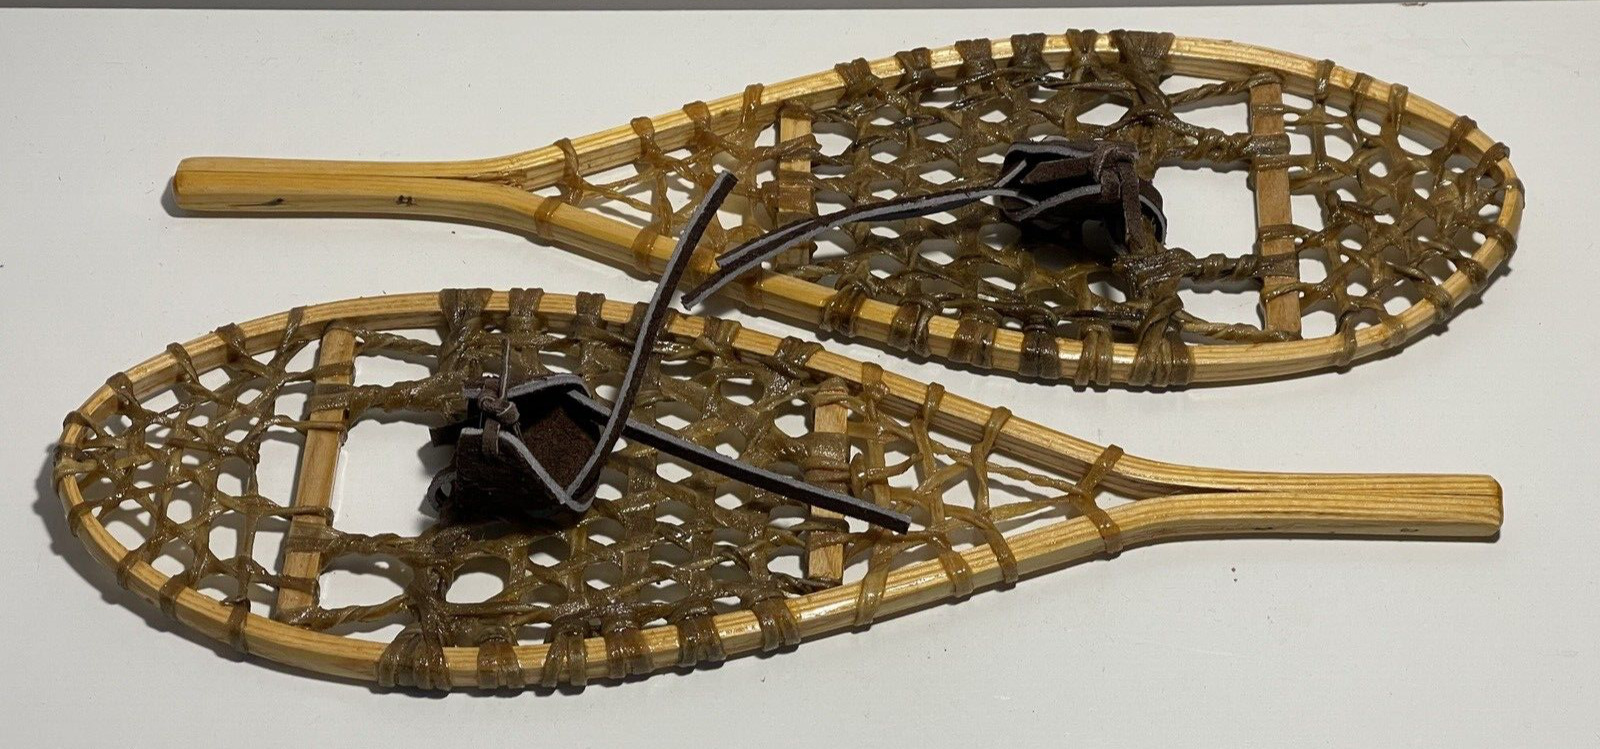 Souvenir Miniture Snow Shoes Hand Made in Canada Rustic Cabin Wall Decoration